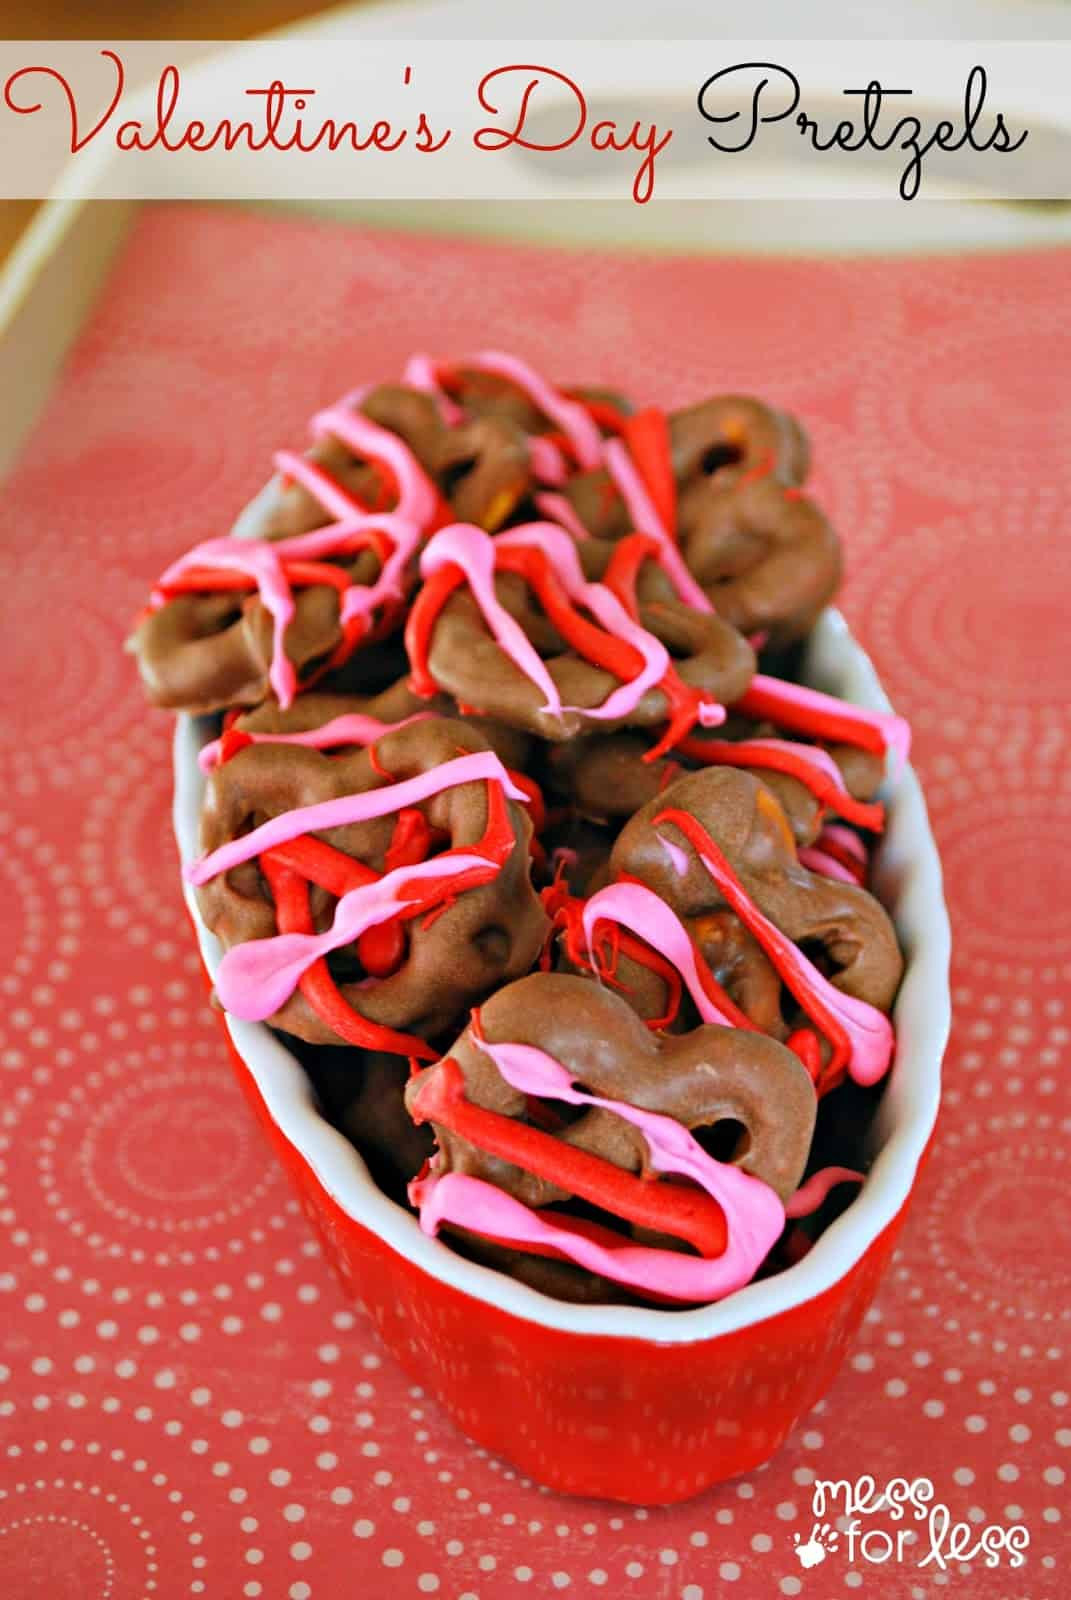 Chocolate Covered Pretzels For Valentines Day
 How To Make Chocolate Covered Pretzels for Valentine s Day